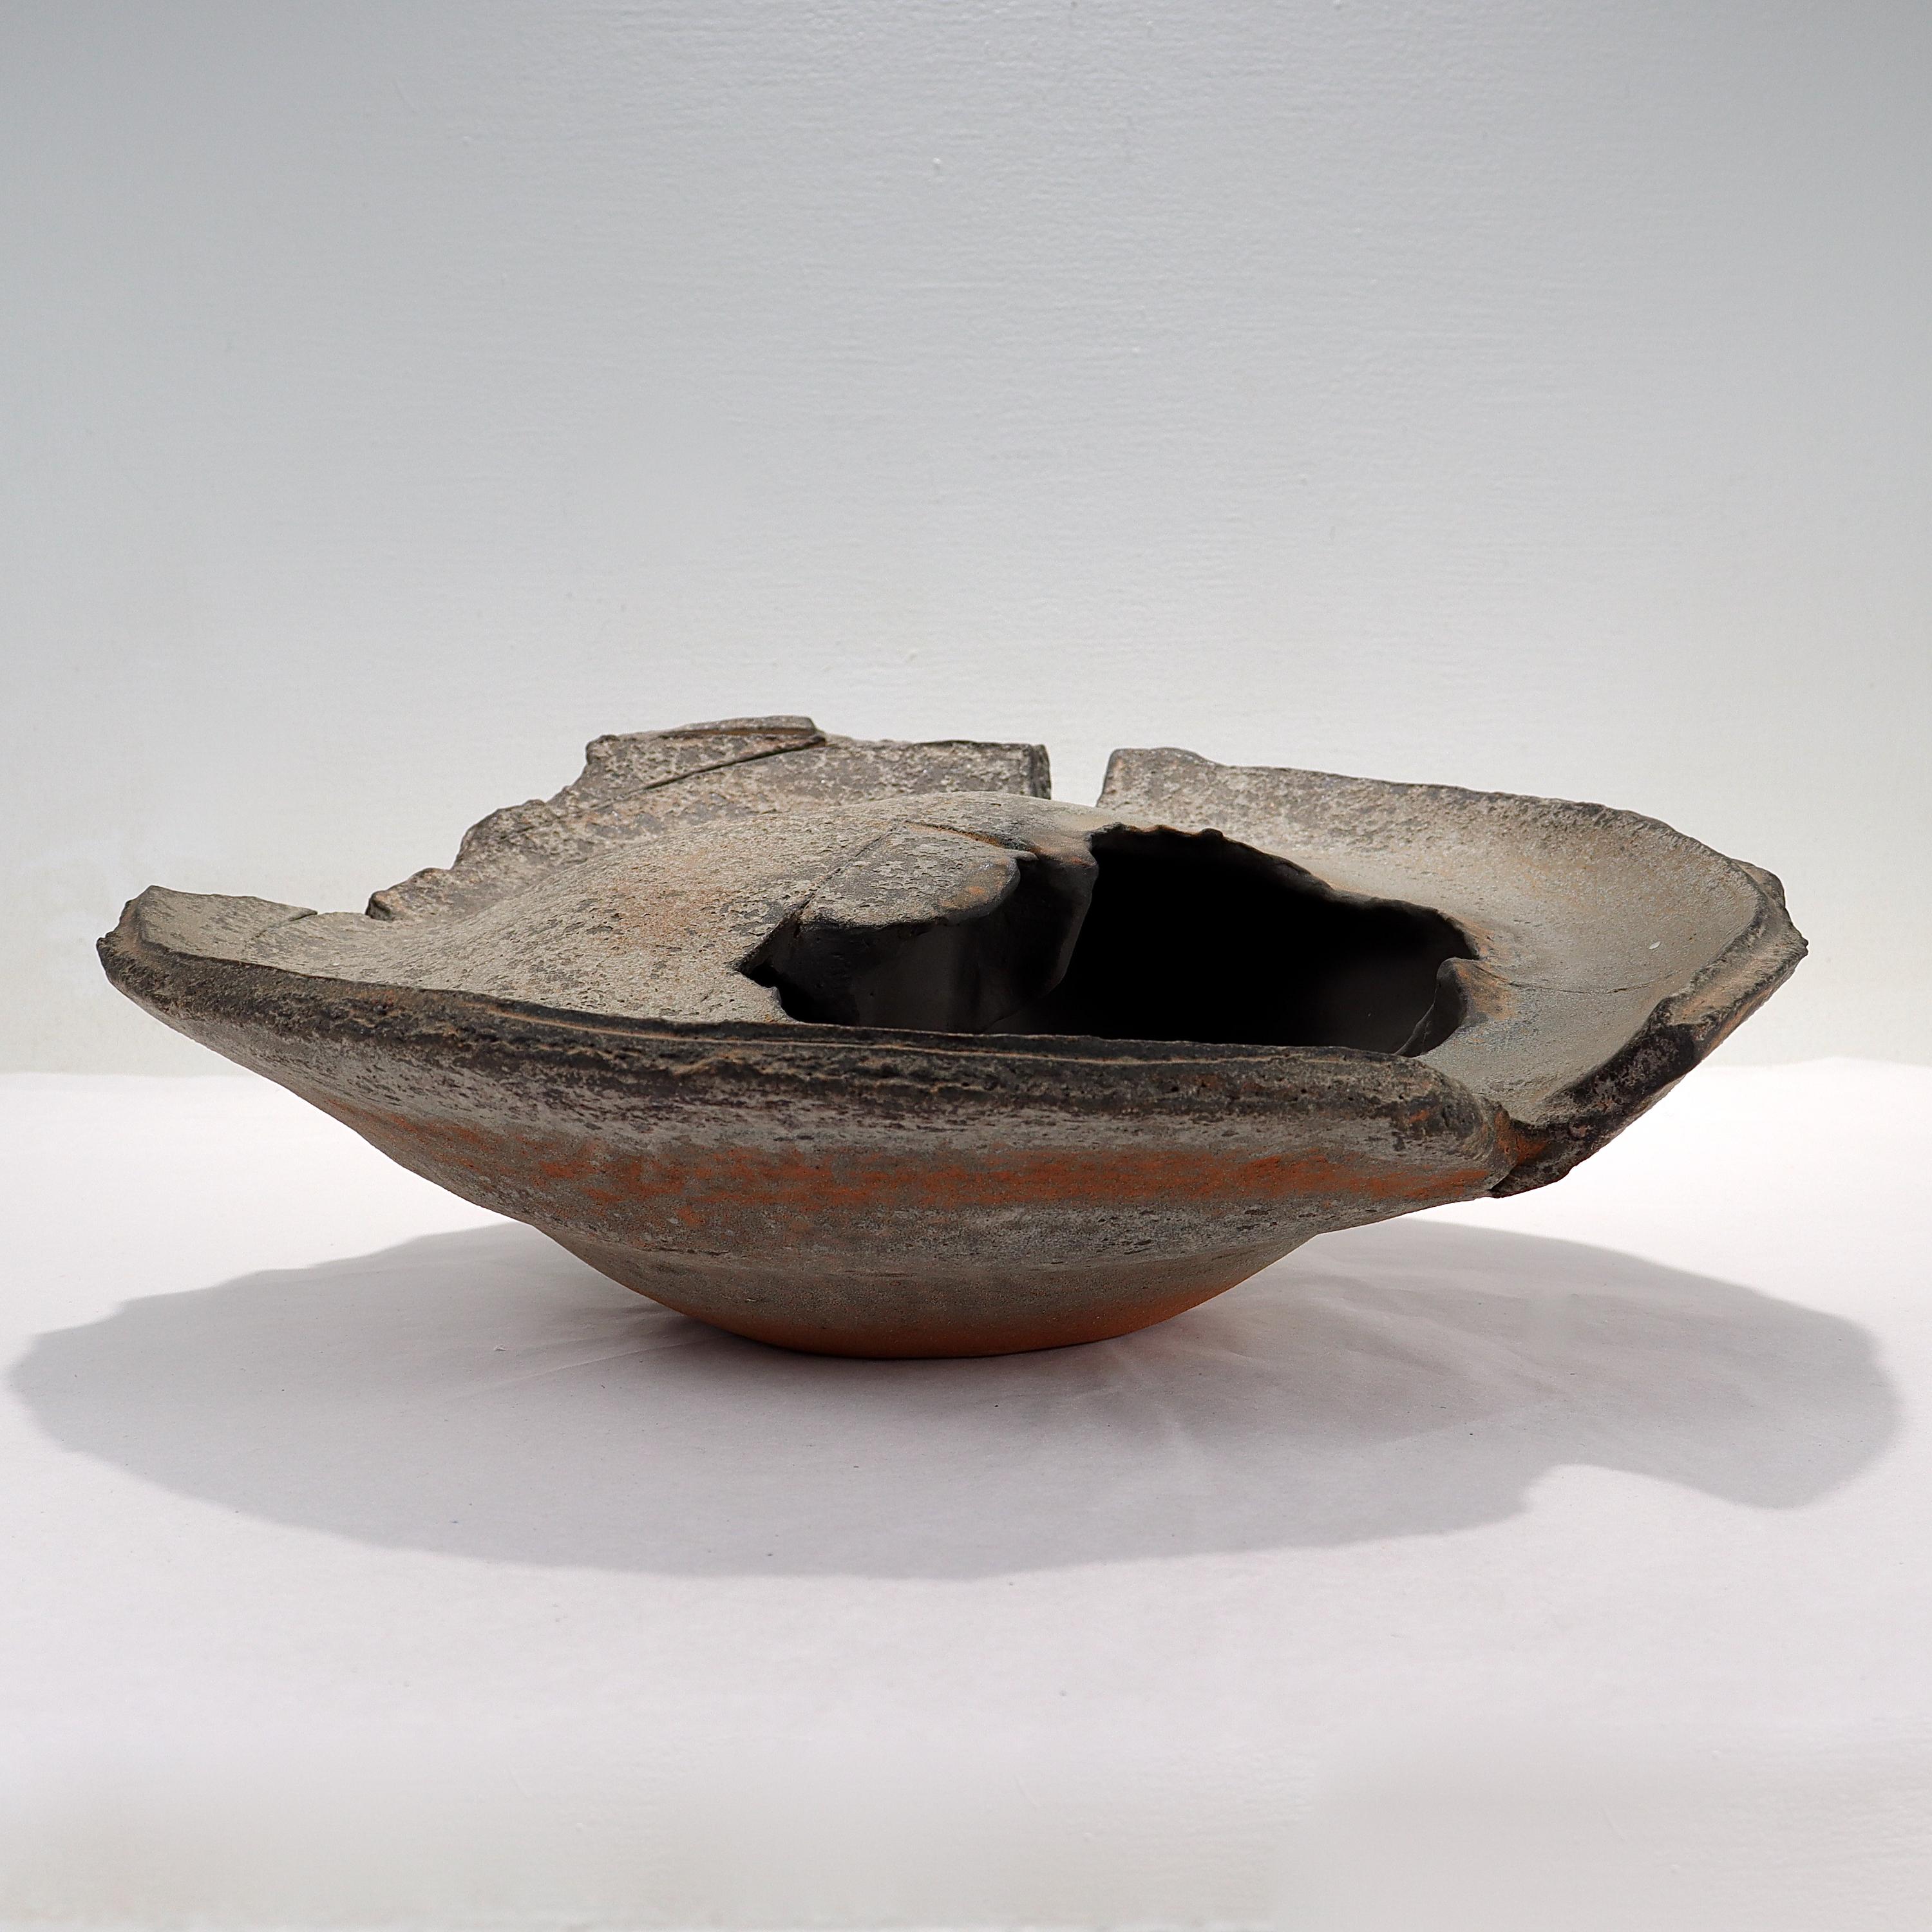 A fine modernist stoneware pottery sculpture or vessel.

By Sumi Maeshima. 

Entitled 